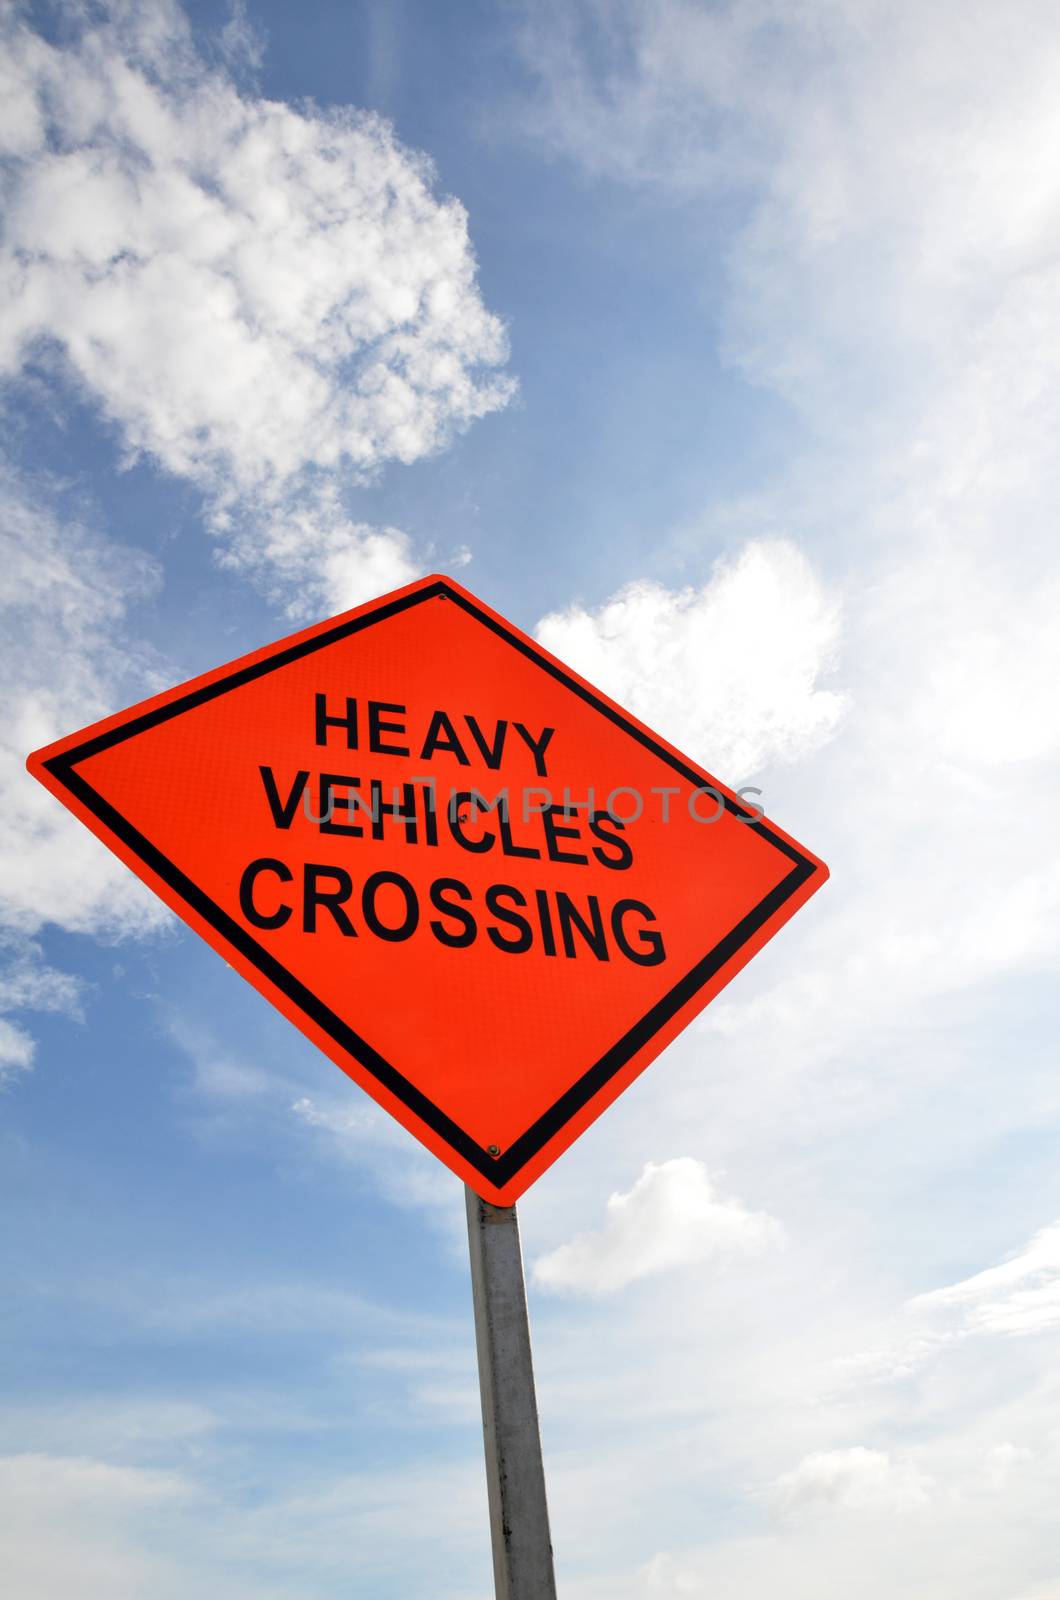 Road sign with a Heavy Vehicles Crossing against a partly cloudy sky background